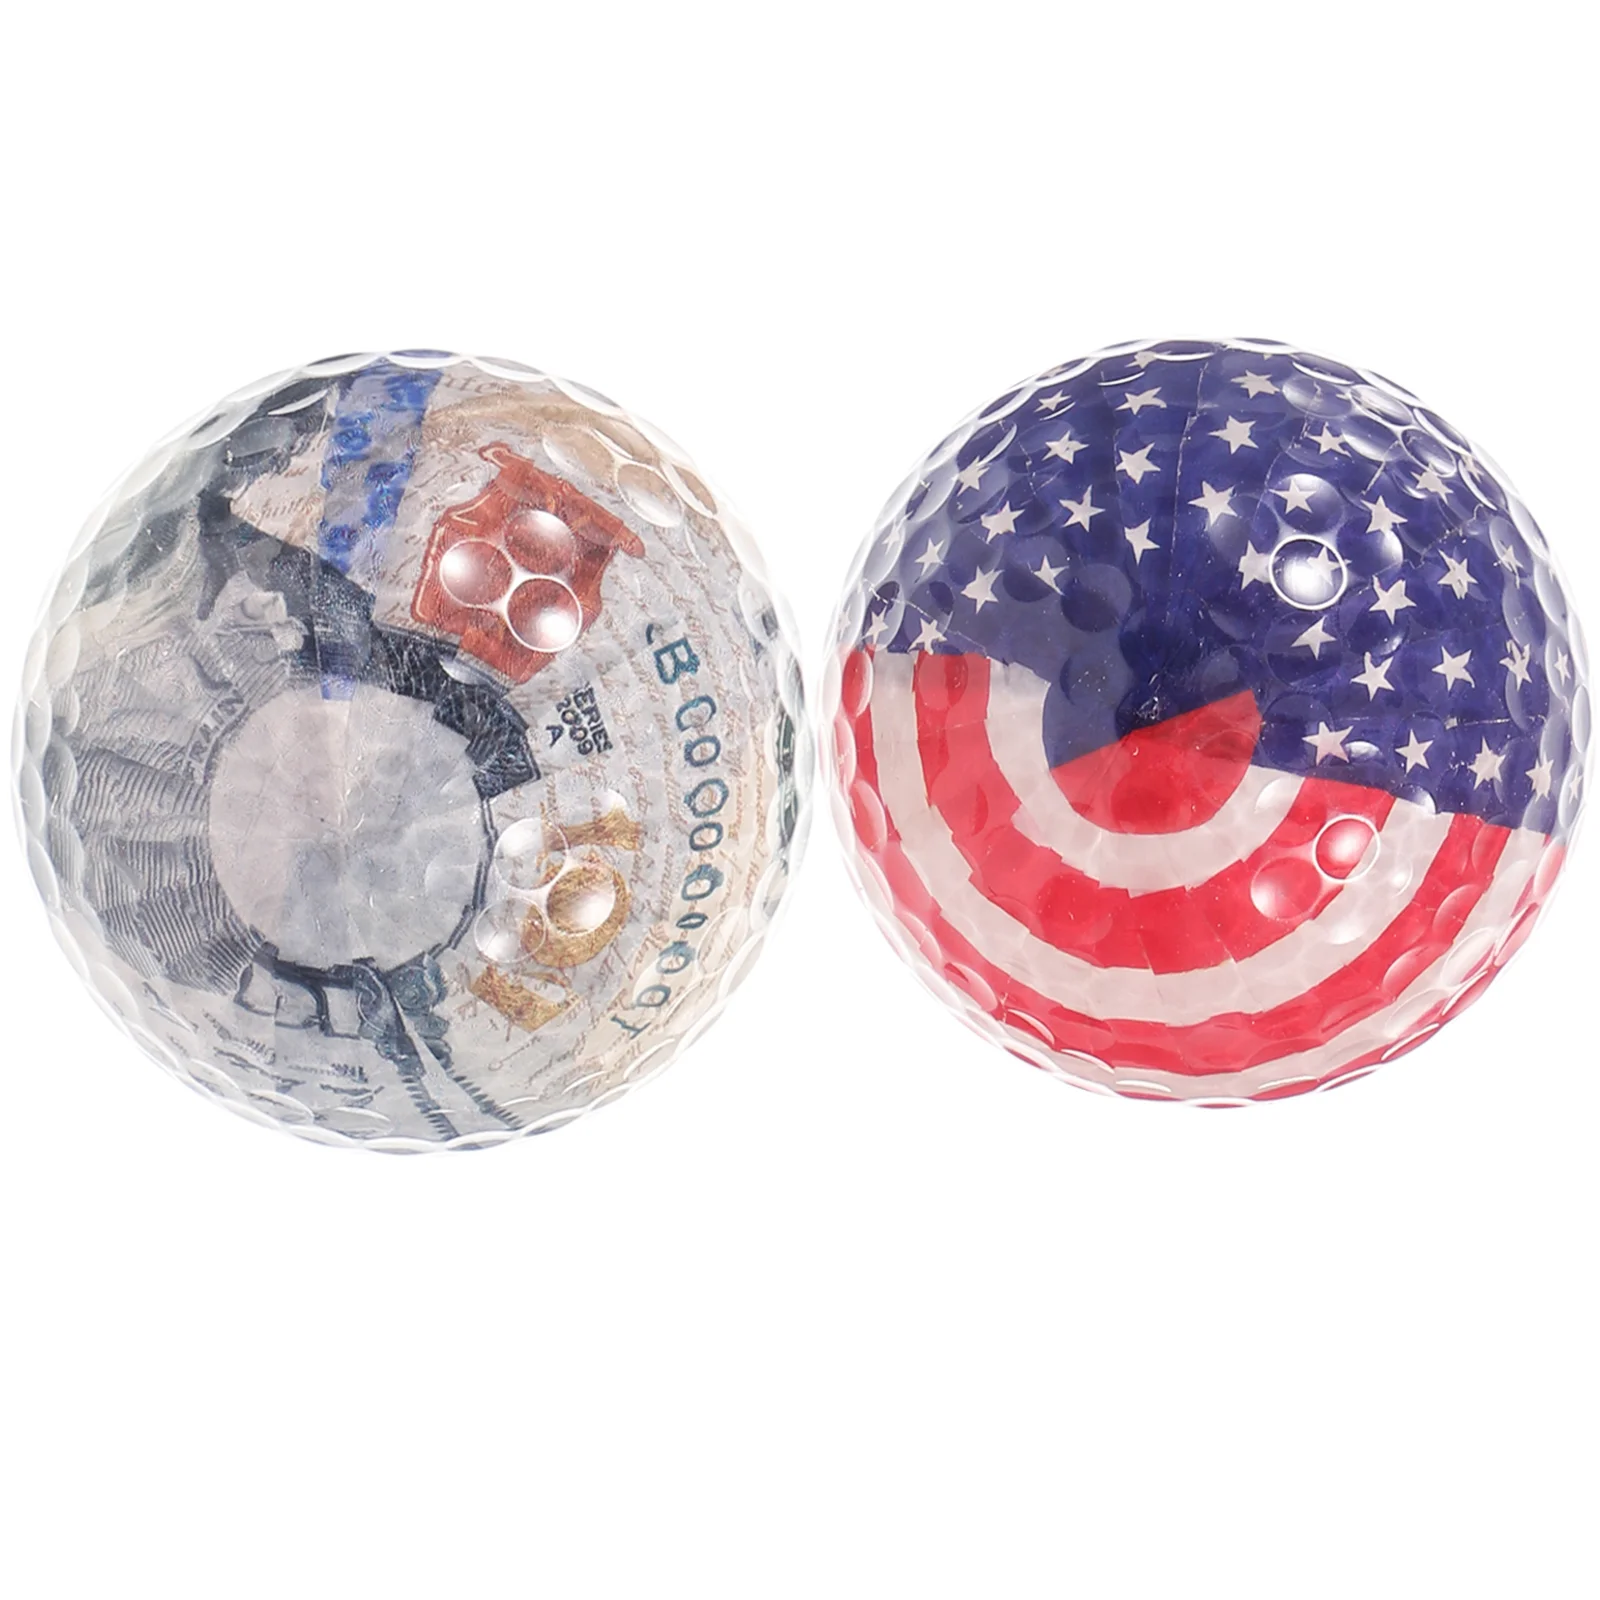 

2 Pcs Golf Practice Ball Stuff Golfing Training Aids Balls Accessories Indoor Synthetic Rubber Womens Multi-function